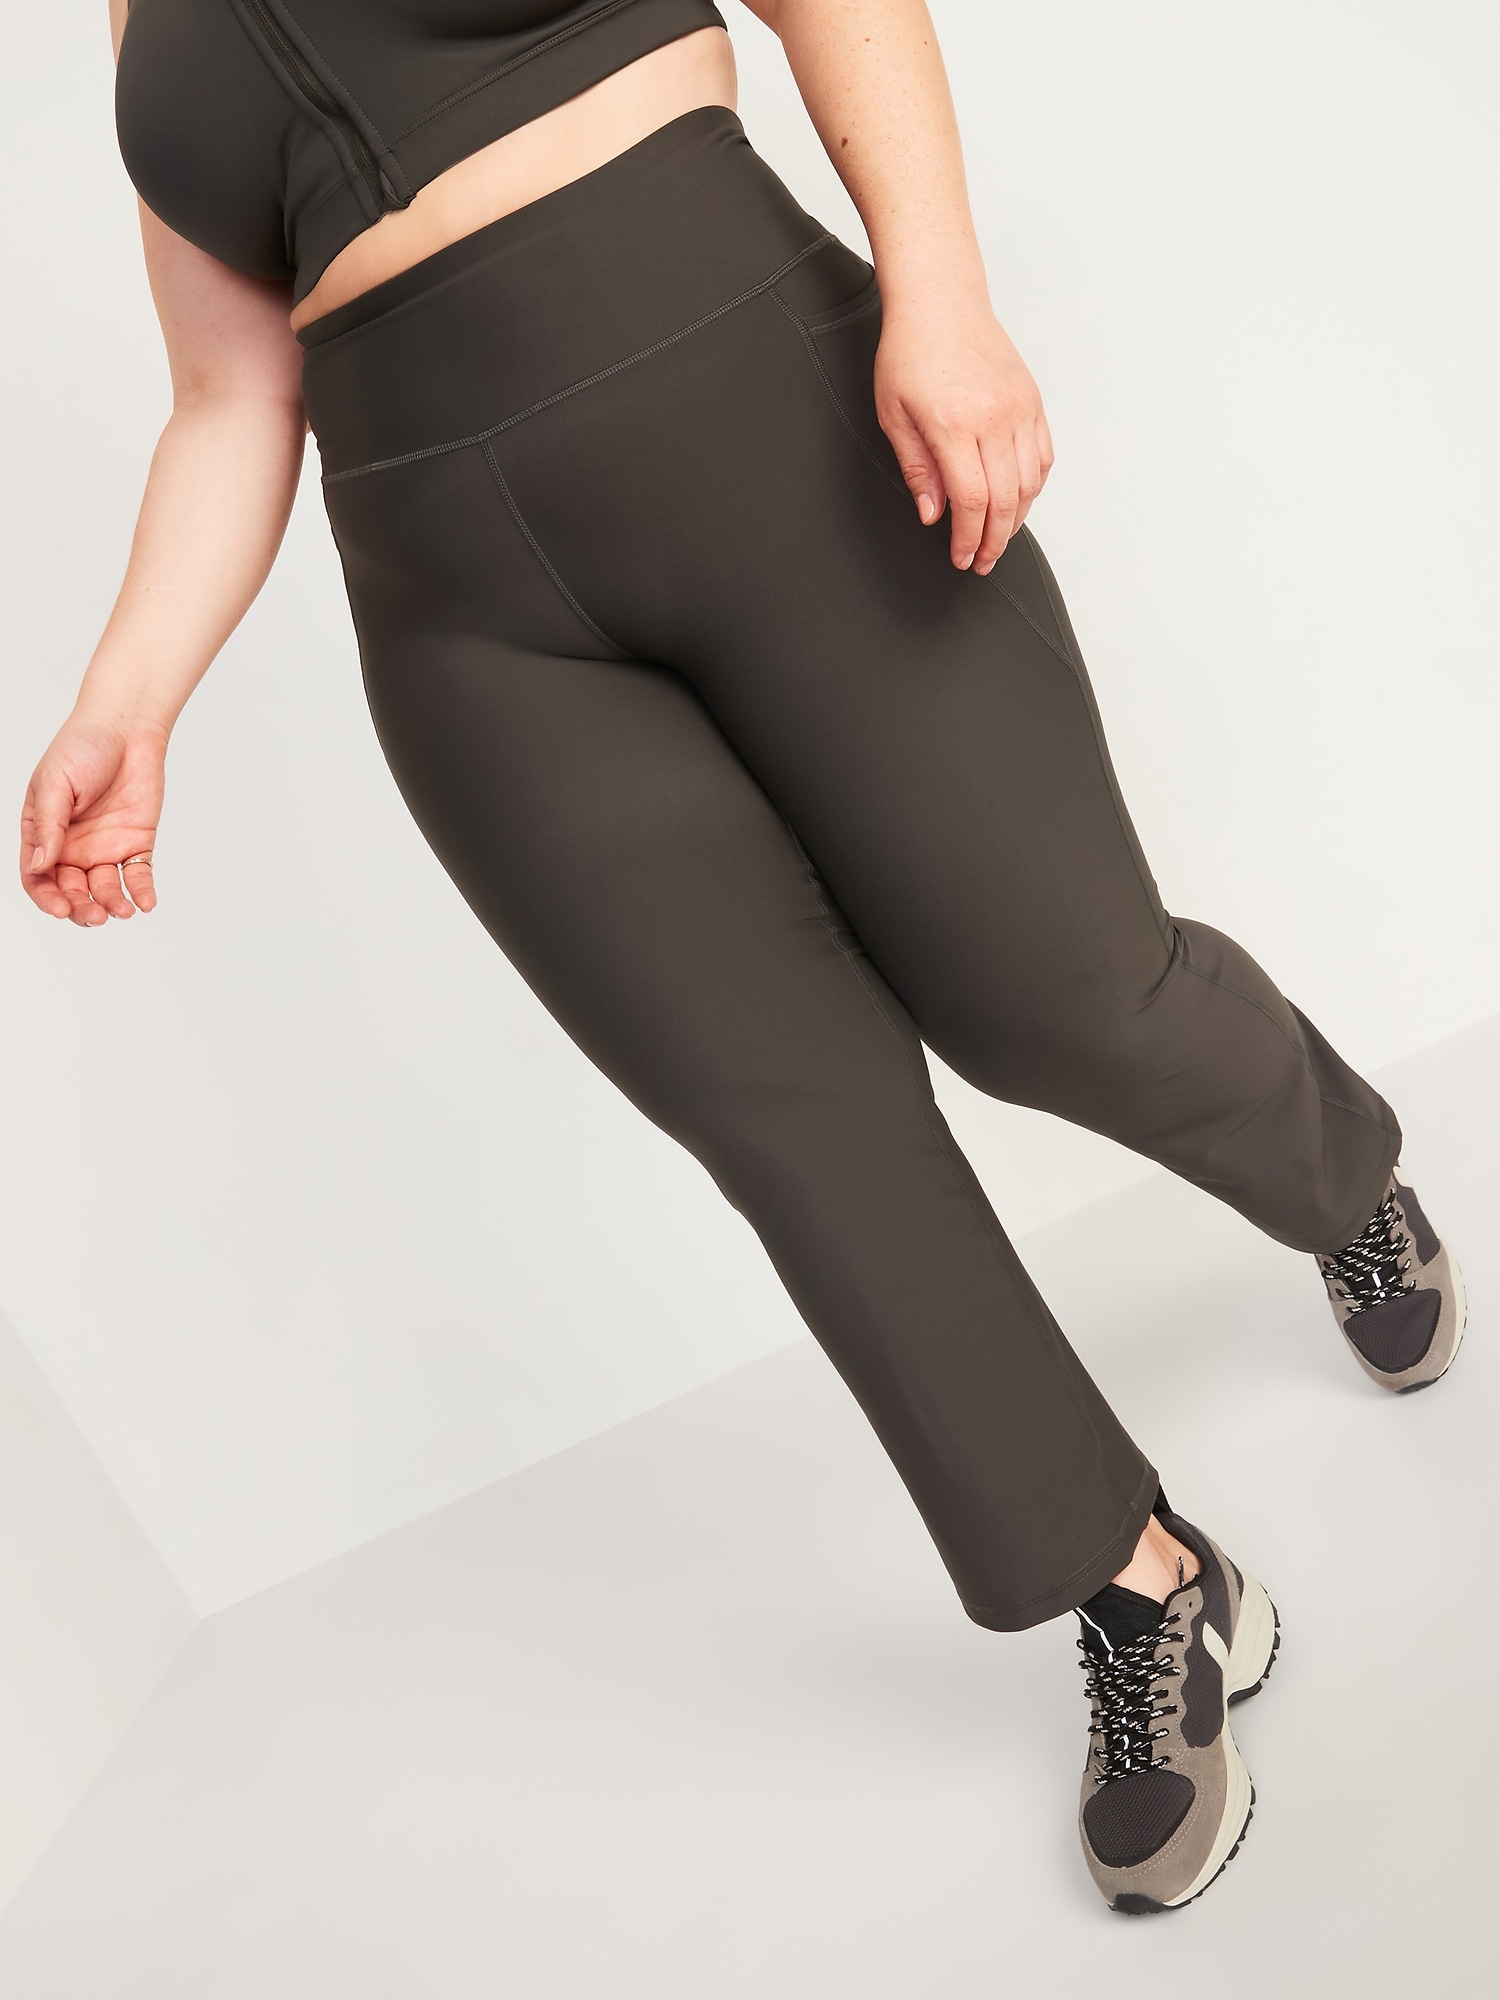 Leggings with Pockets for Women Tummy Control Solid High Waist Casual Ankle  Flare-Leg Leggings 